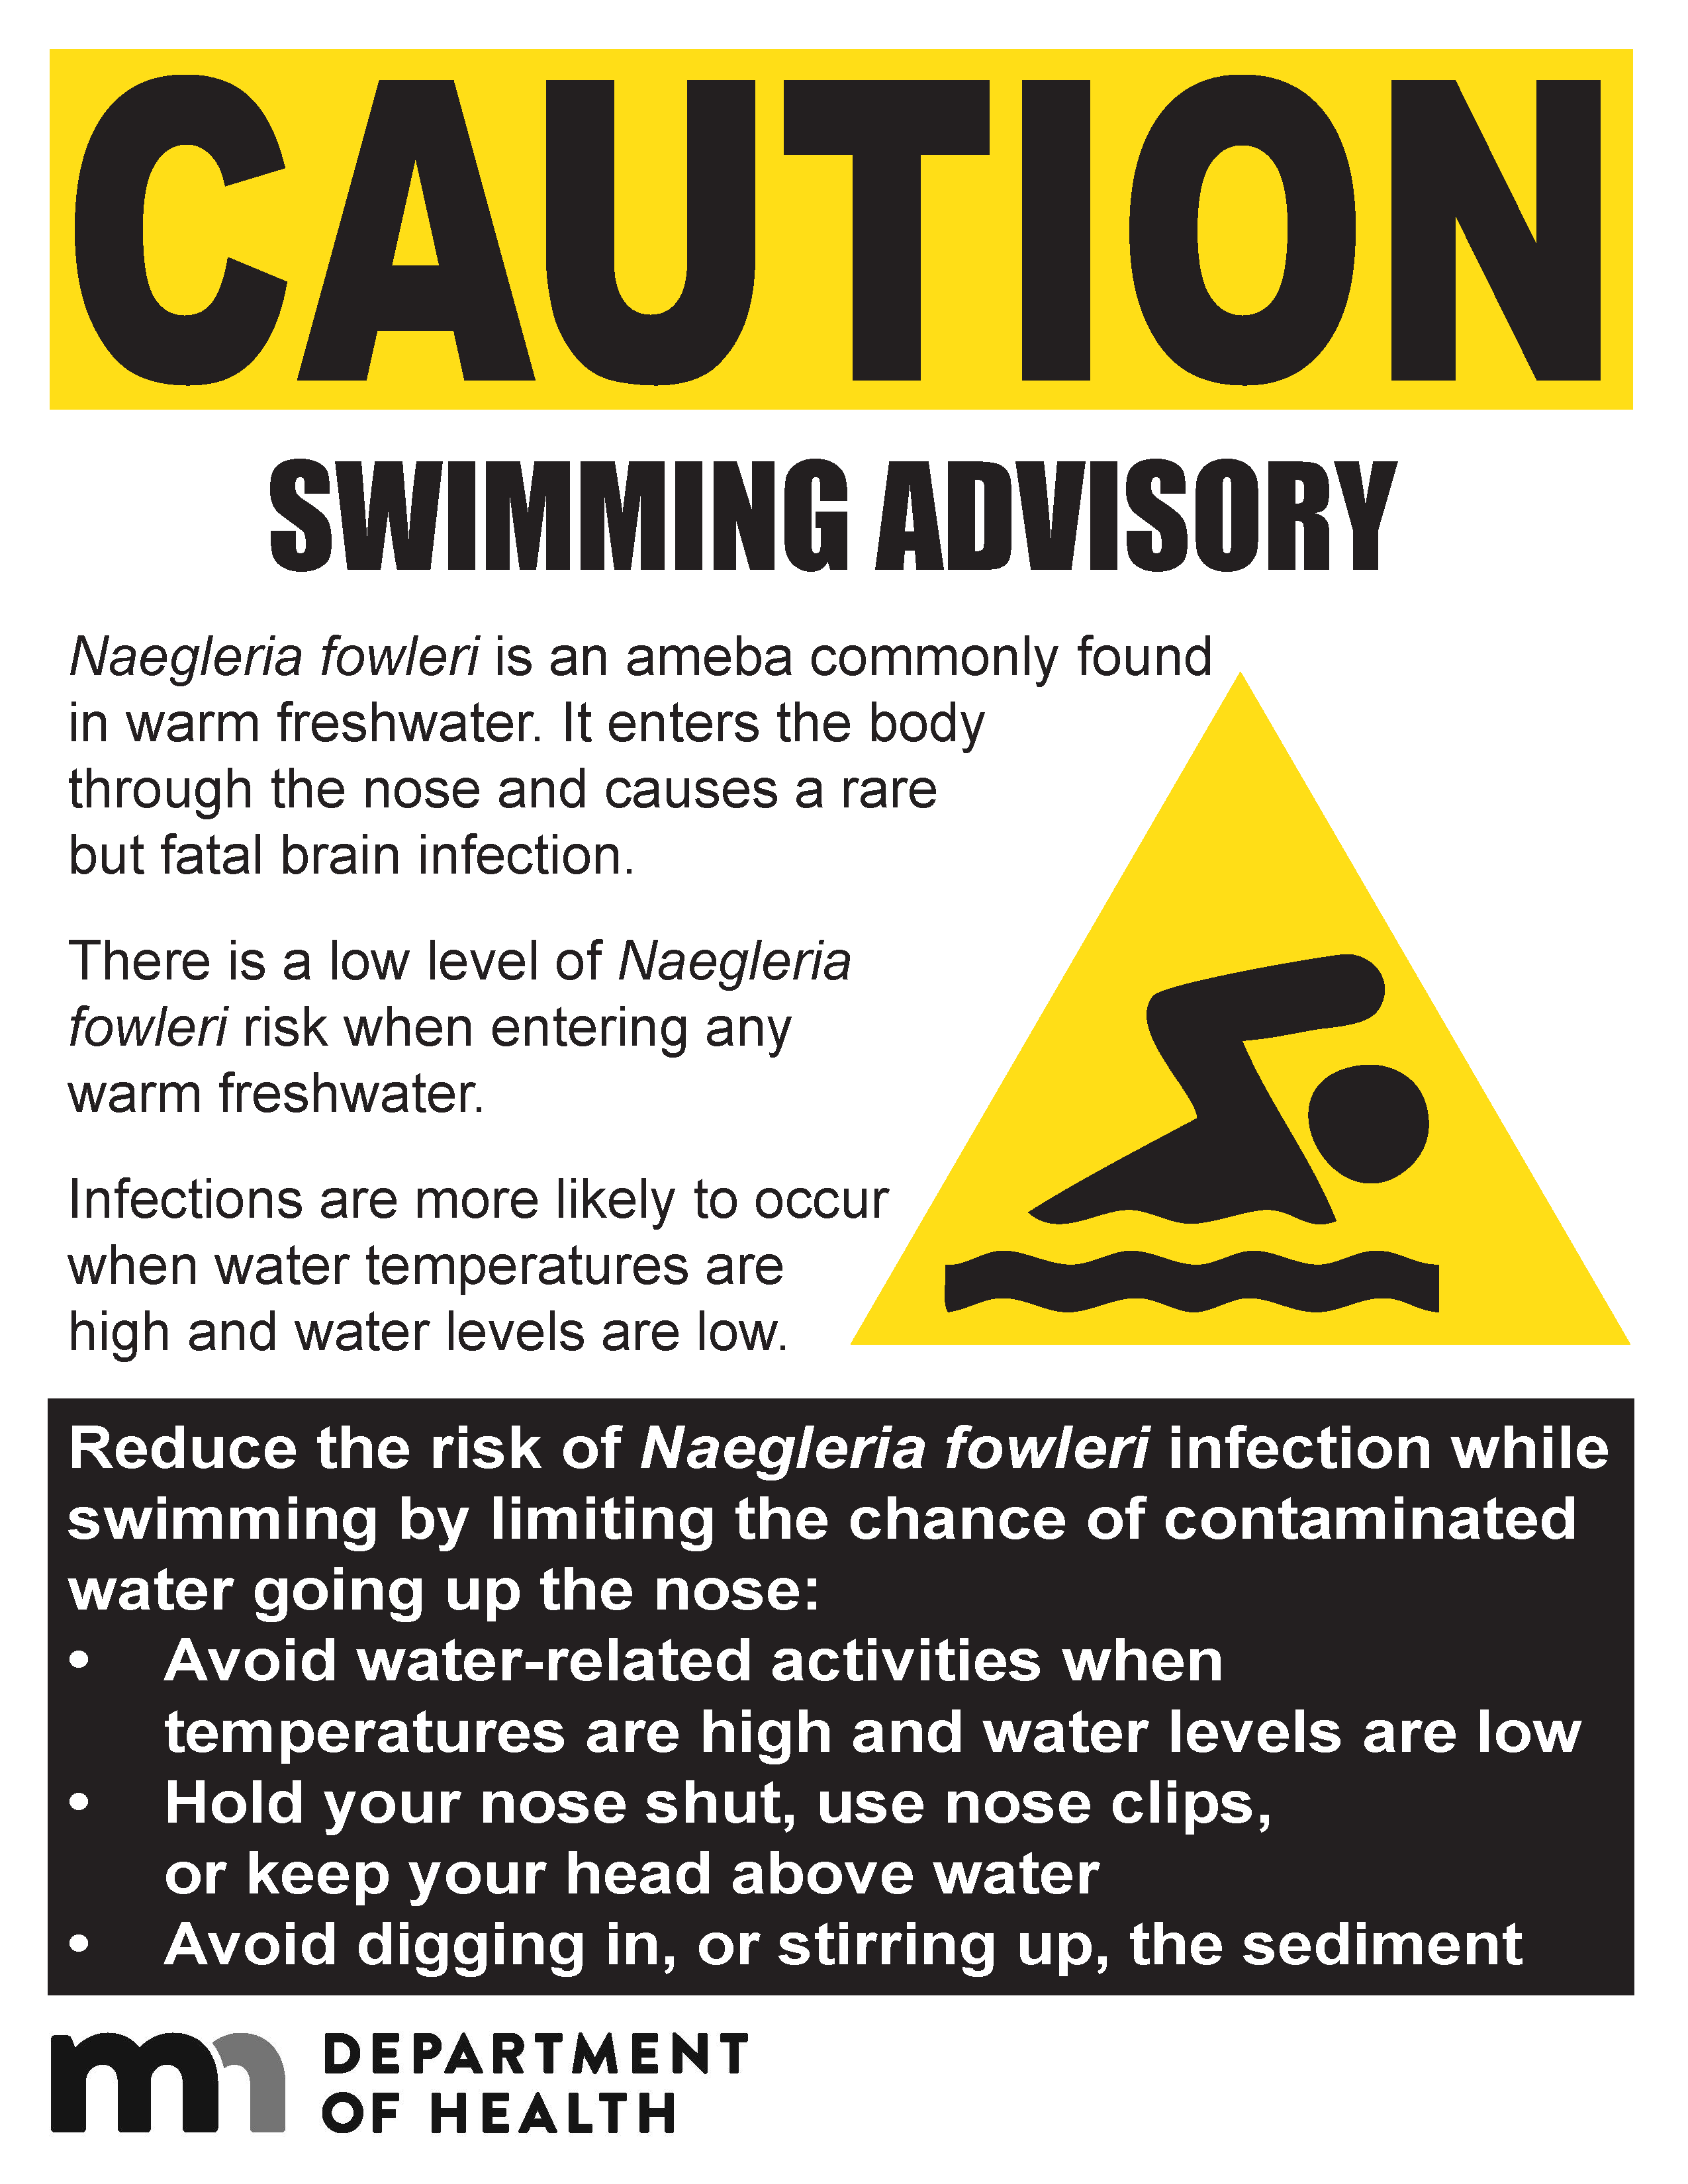 Important notice to all swimmers poster